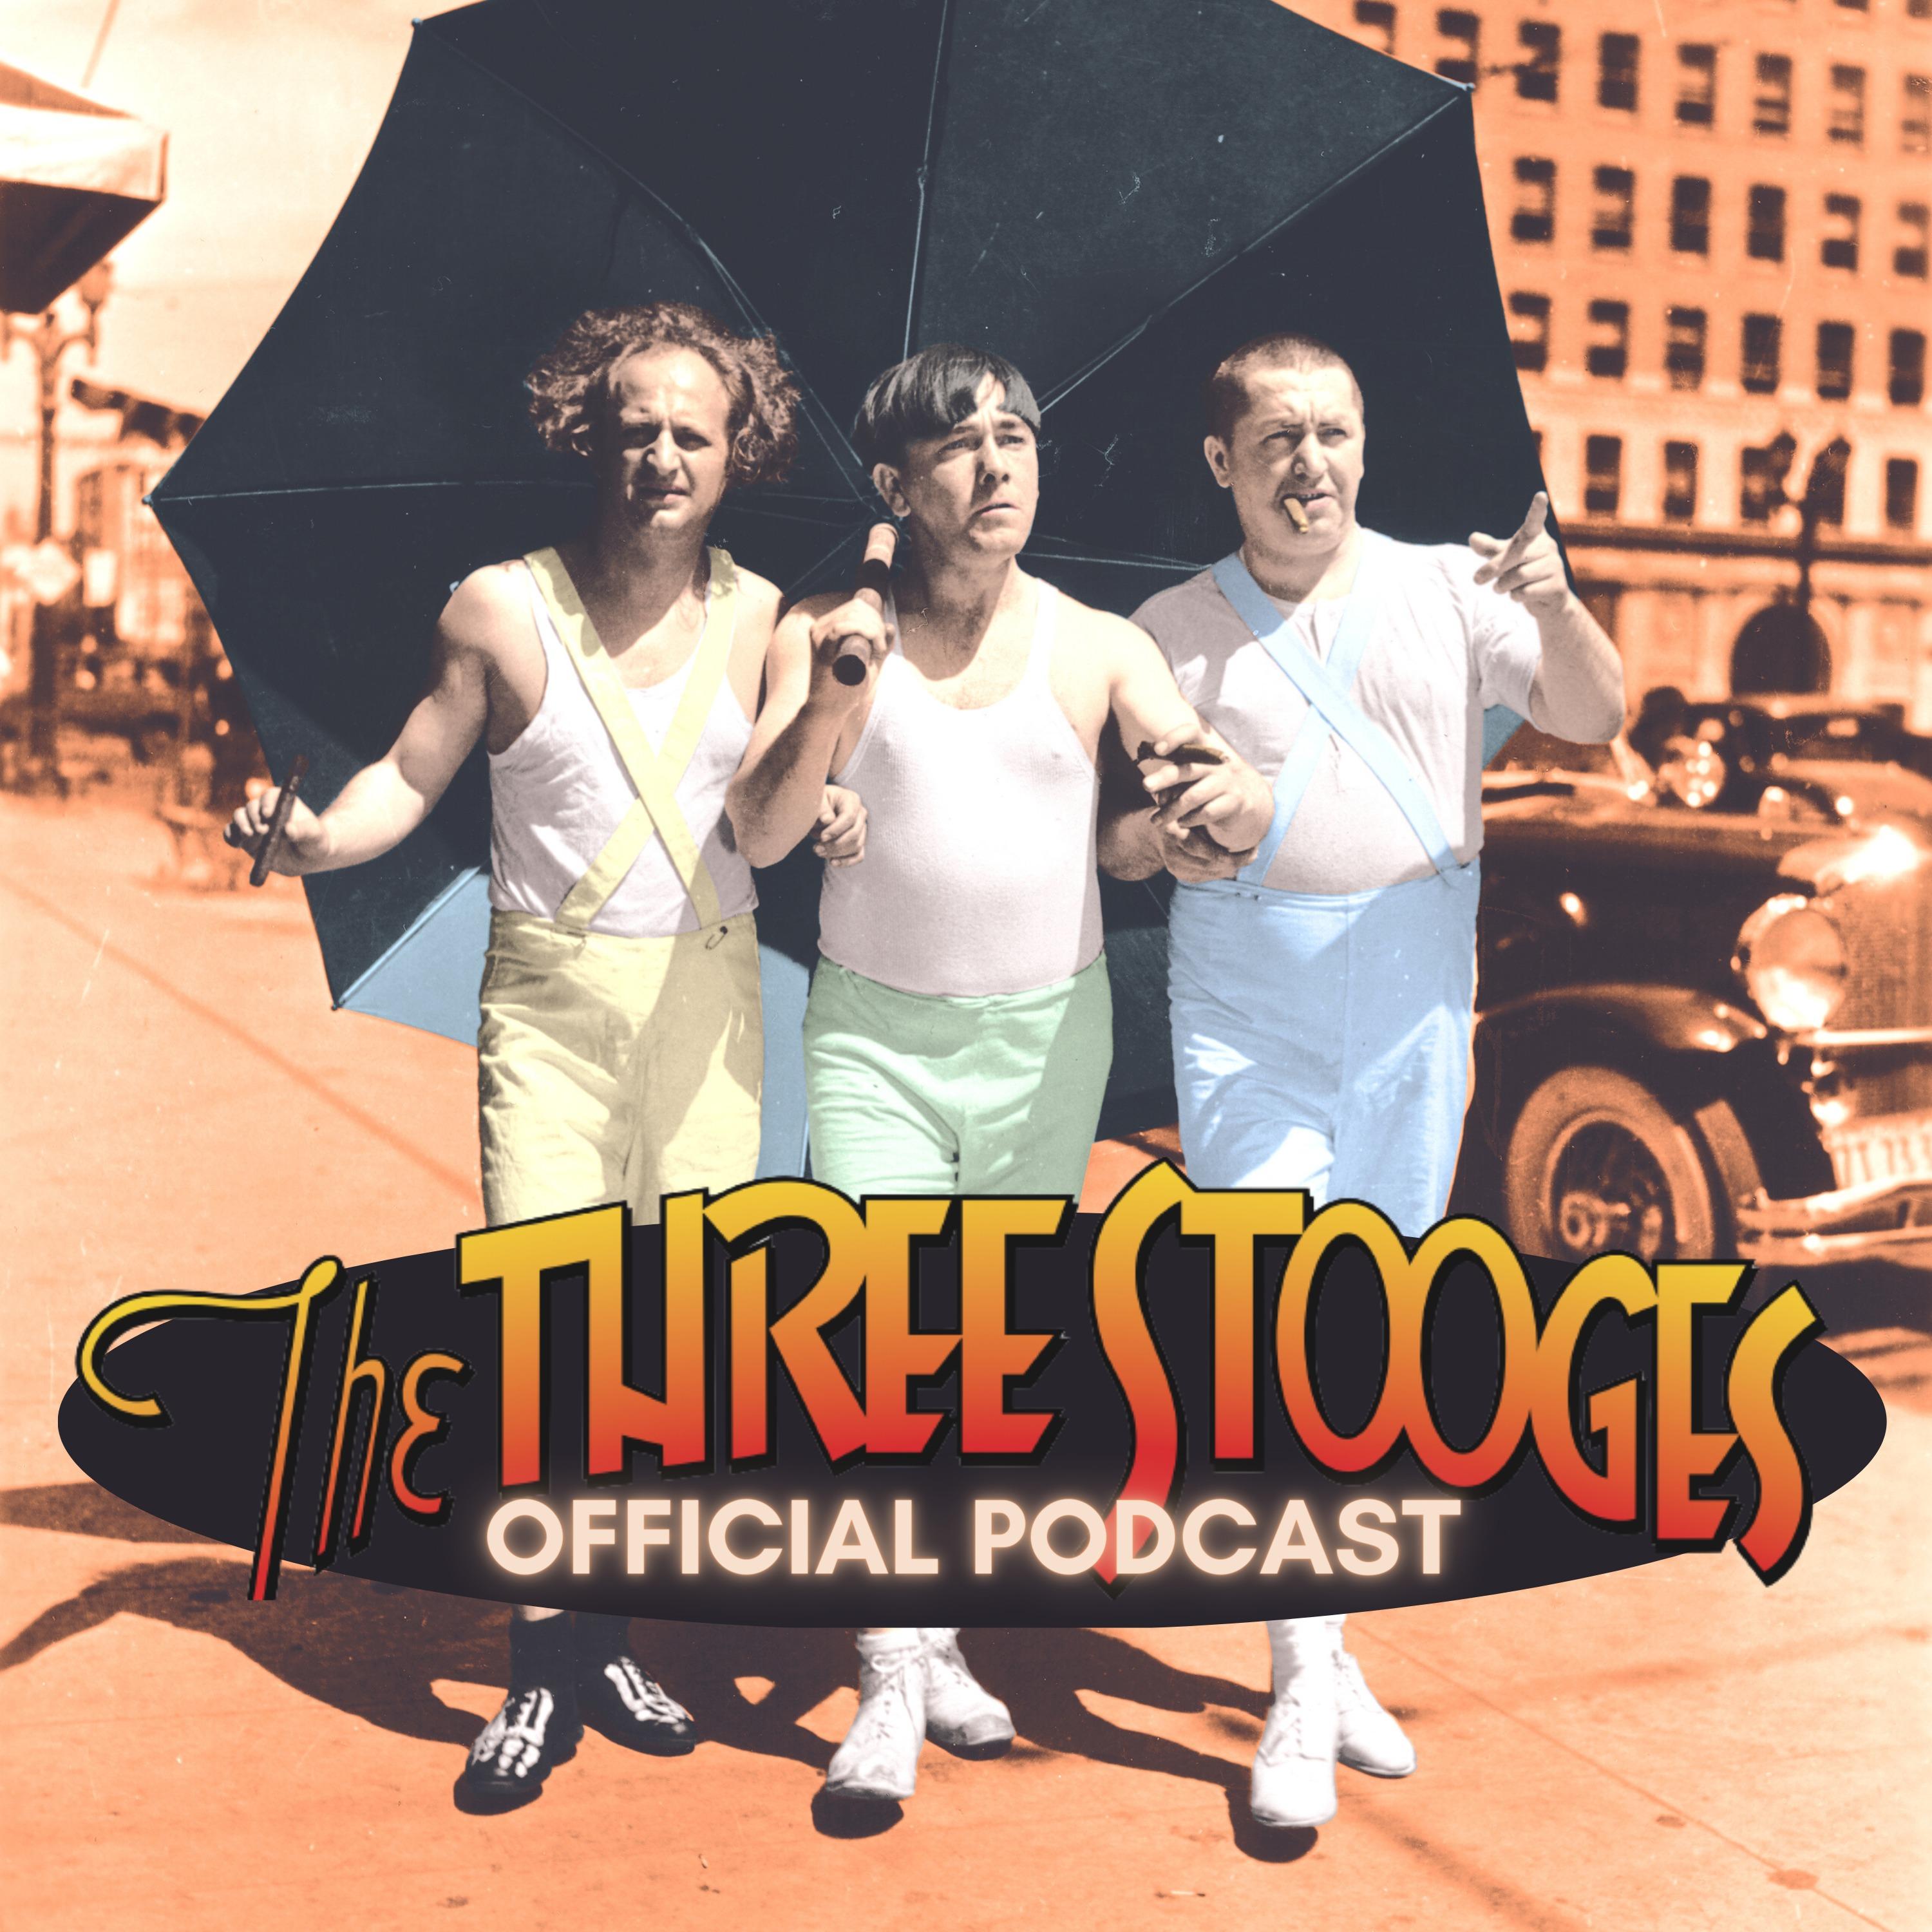 The Three Stooges Official Podcast